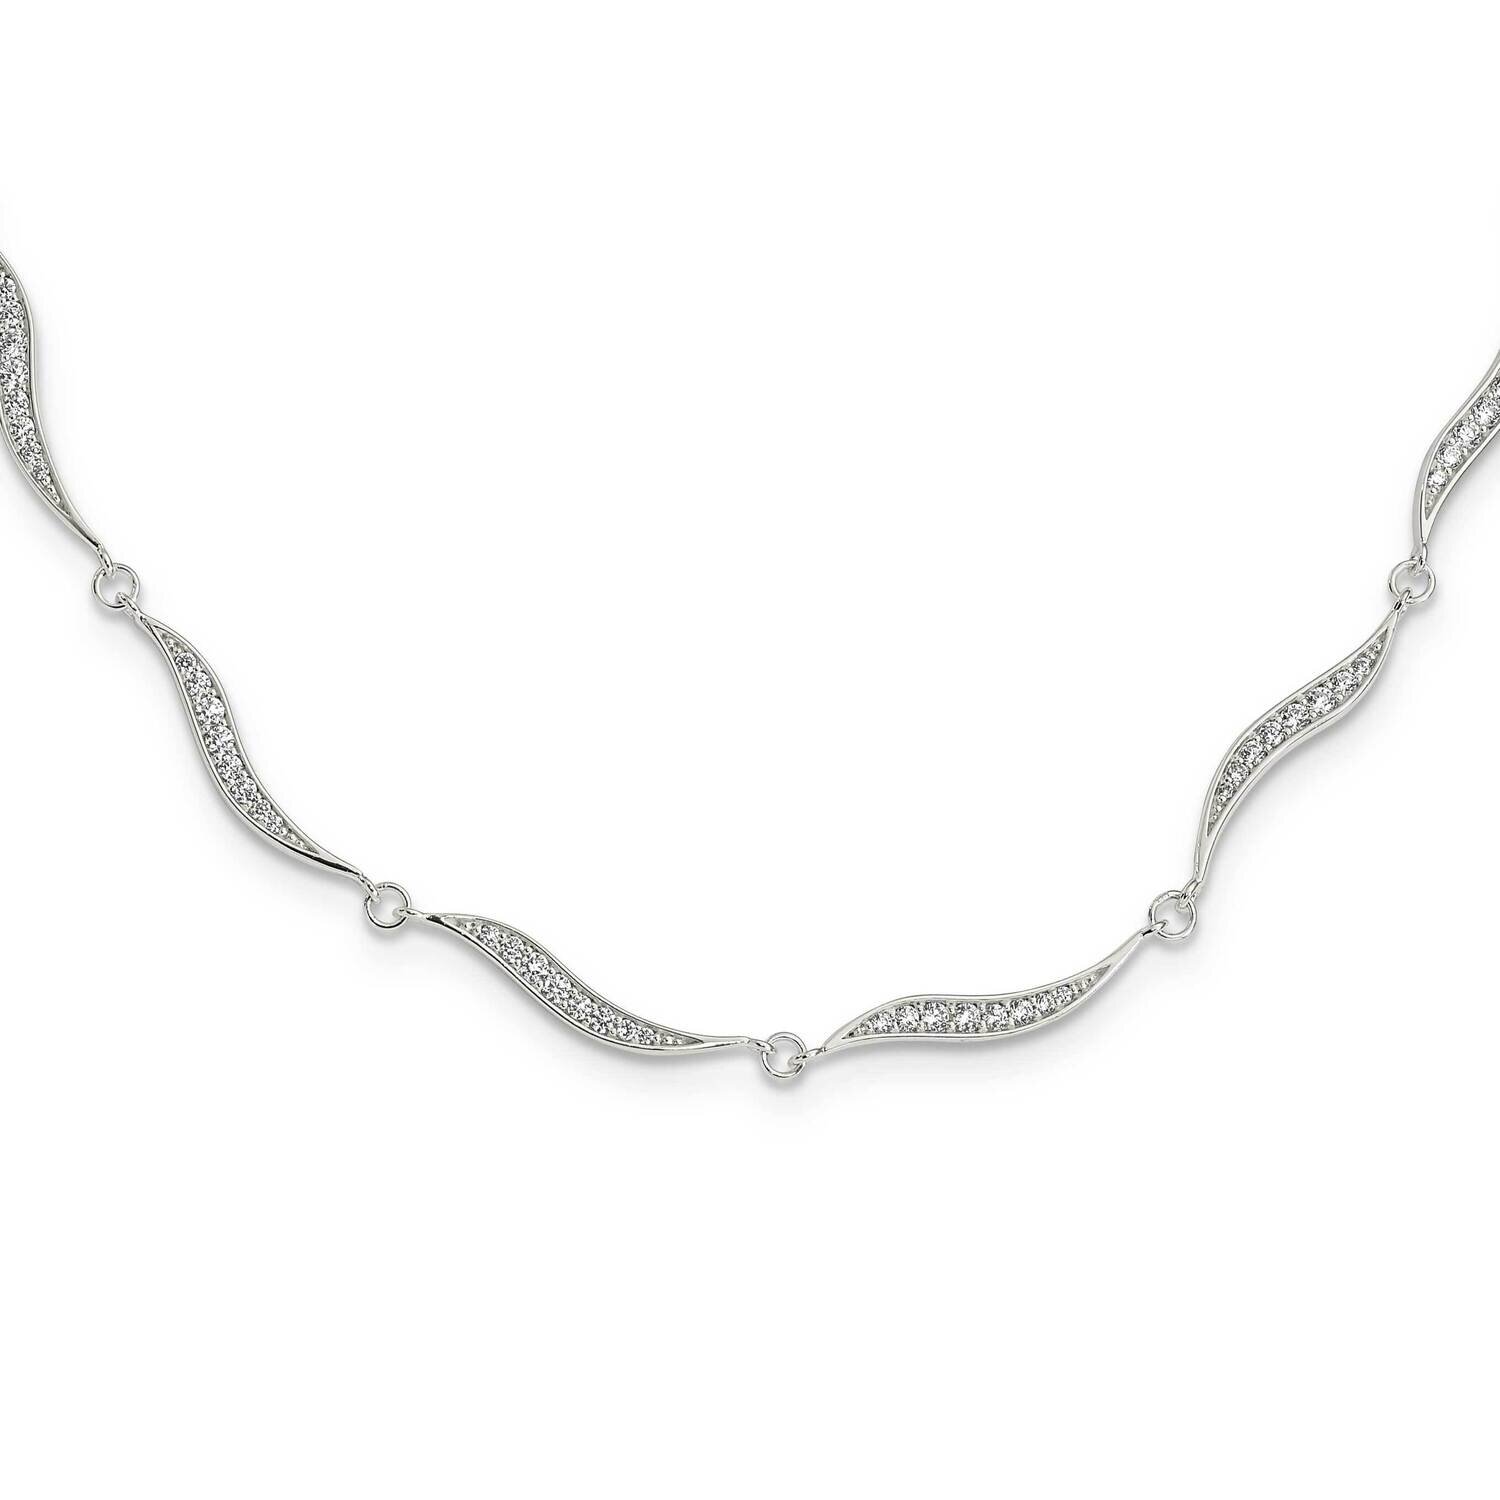 Wavy Link CZ Diamond with 2.25 In Extender Necklace 15.5 Inch Sterling Silver QG6001-15.5